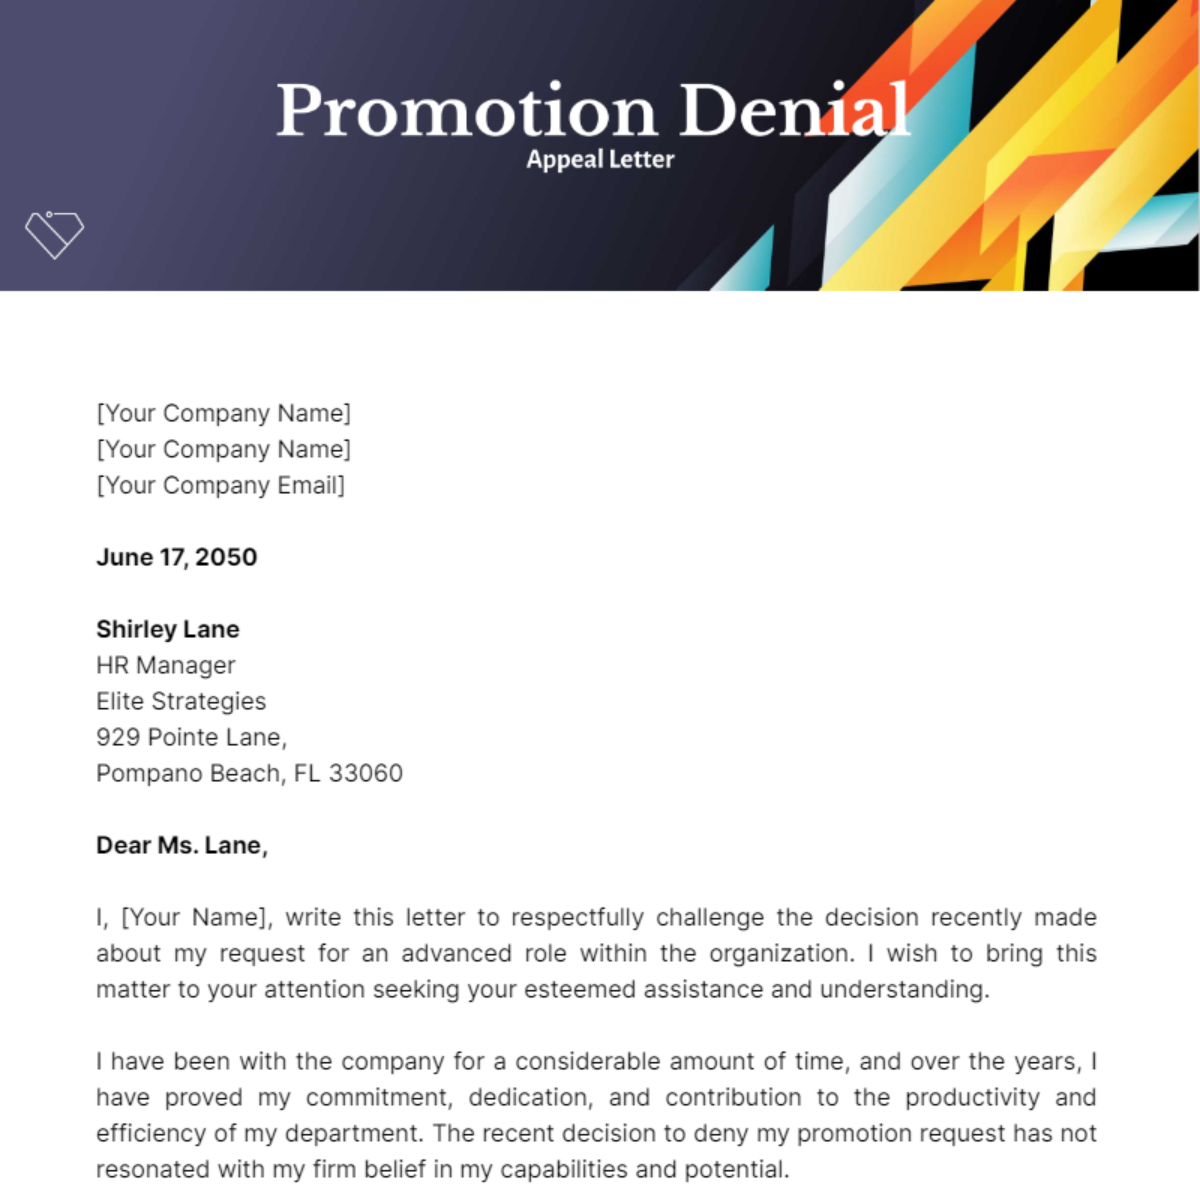 Promotion Denial Appeal Letter Template